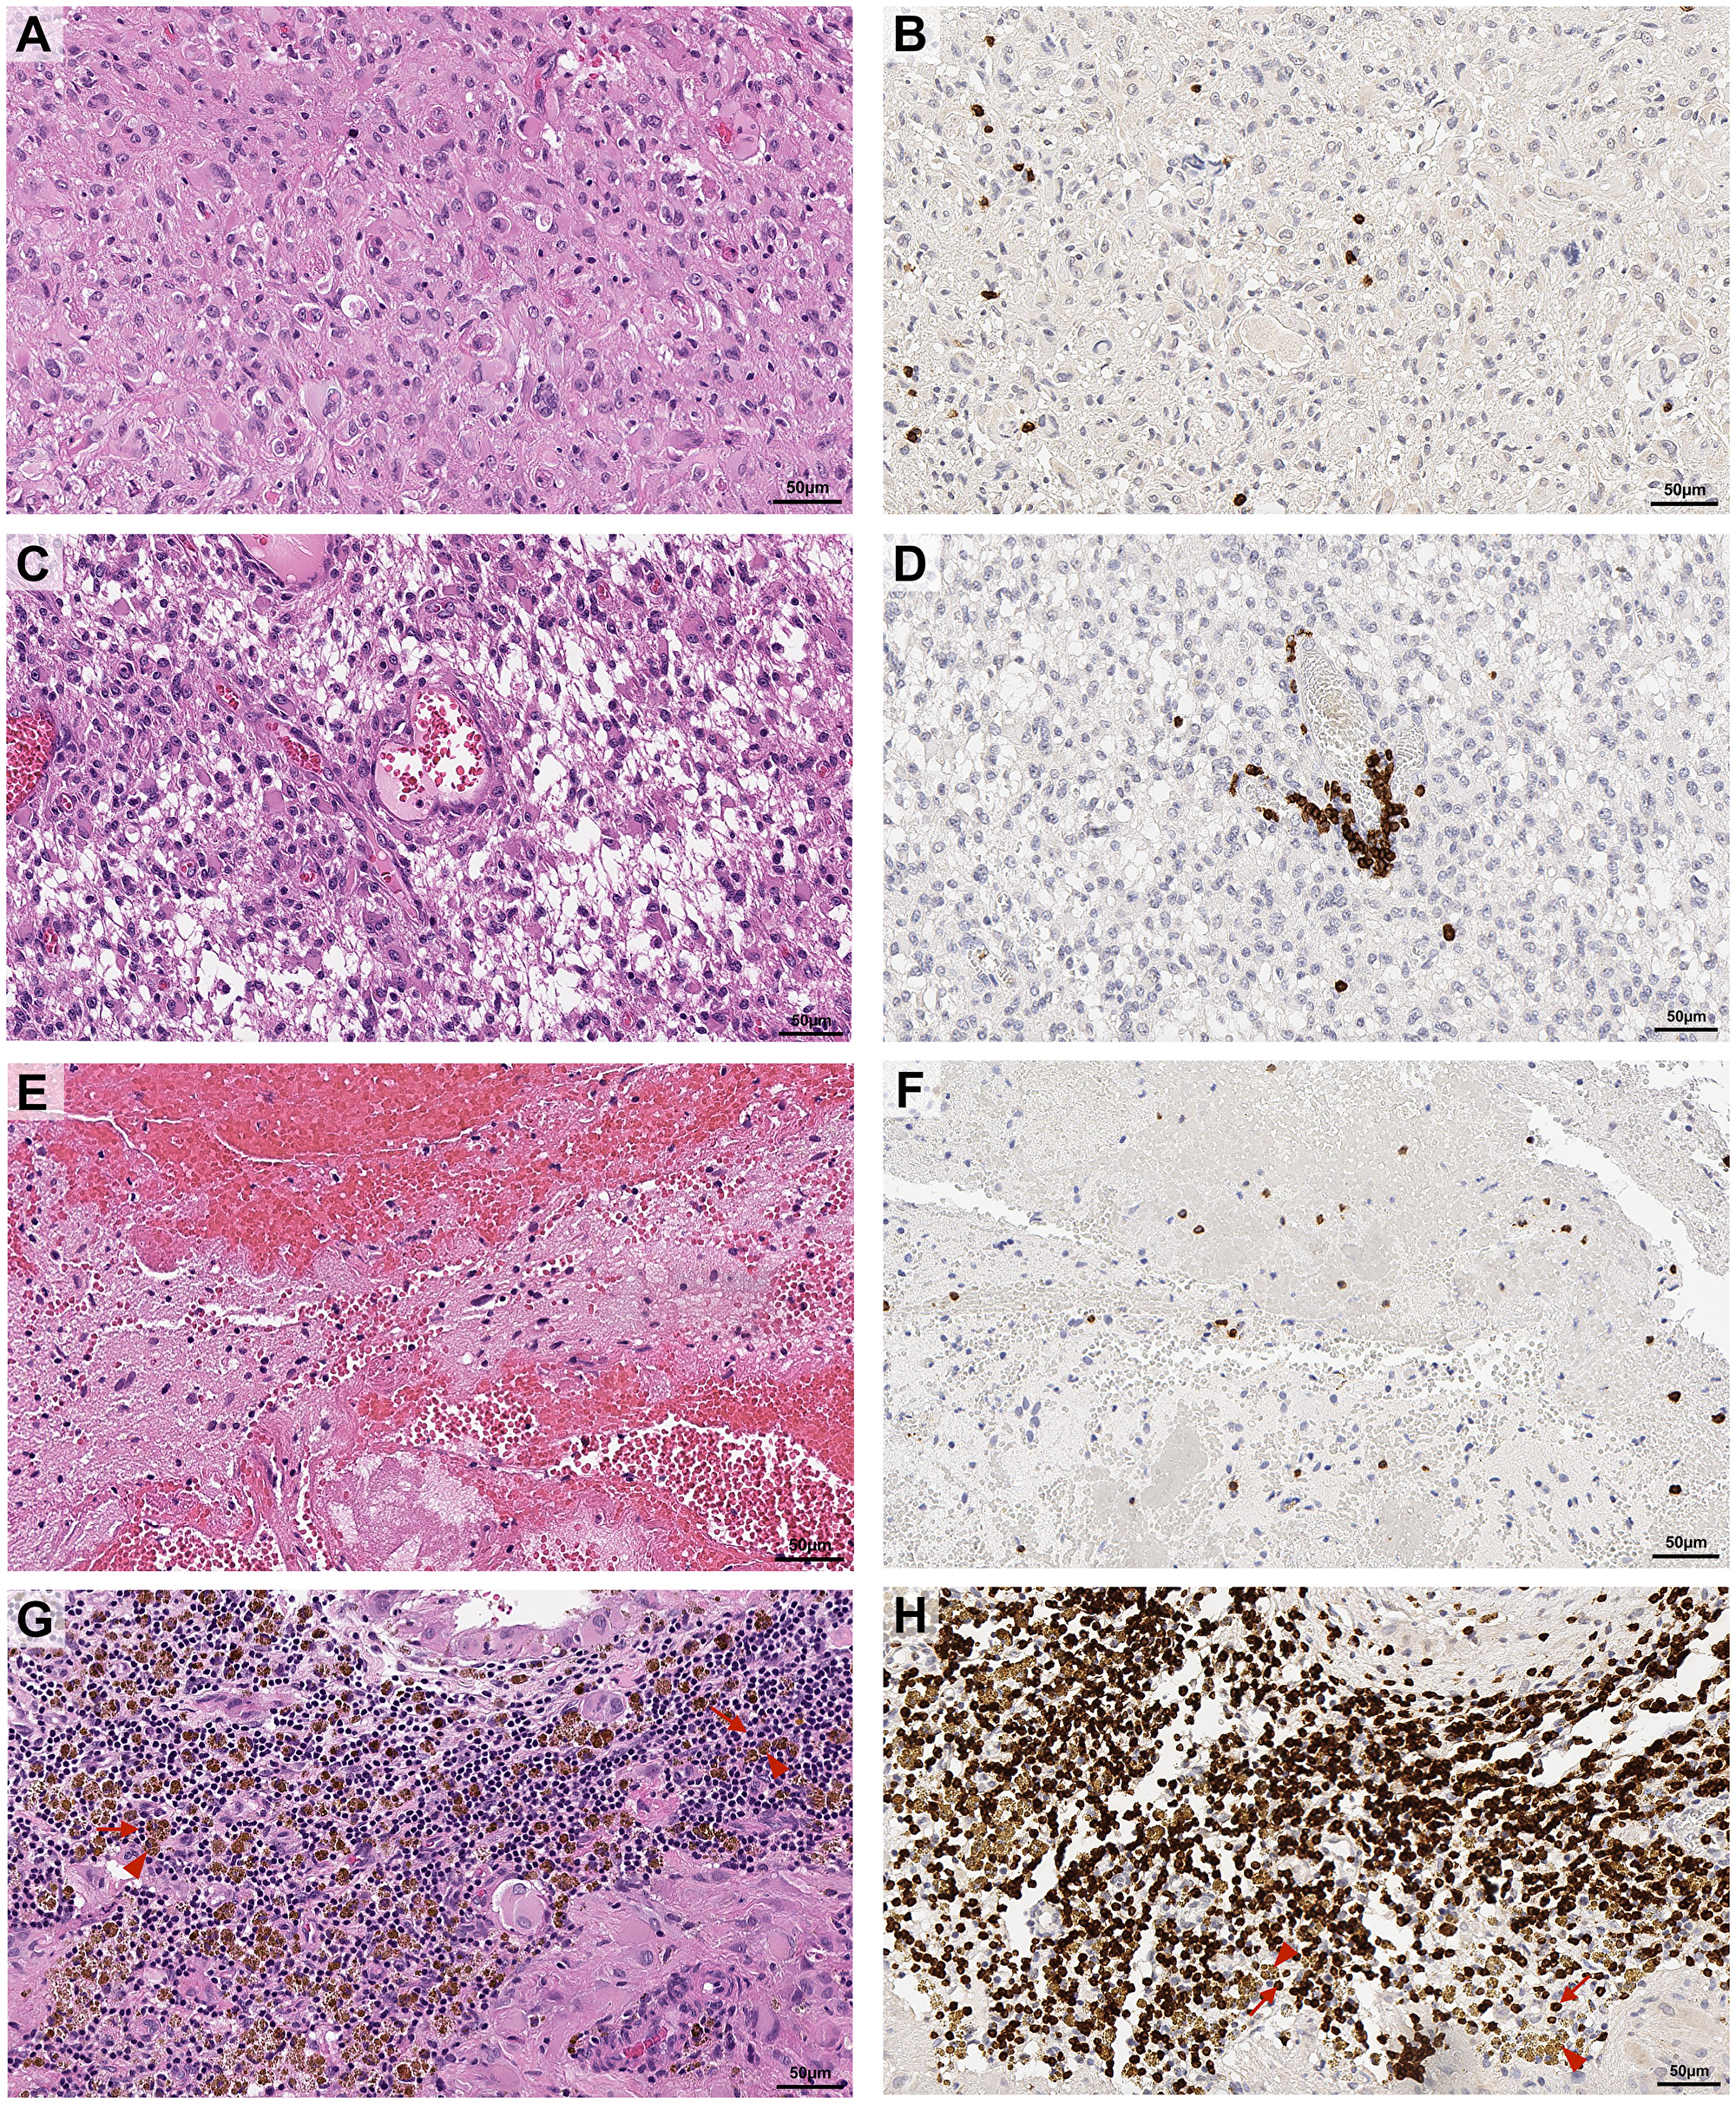 Representative images of topographical localisation of T cells in glioblastoma tumours.